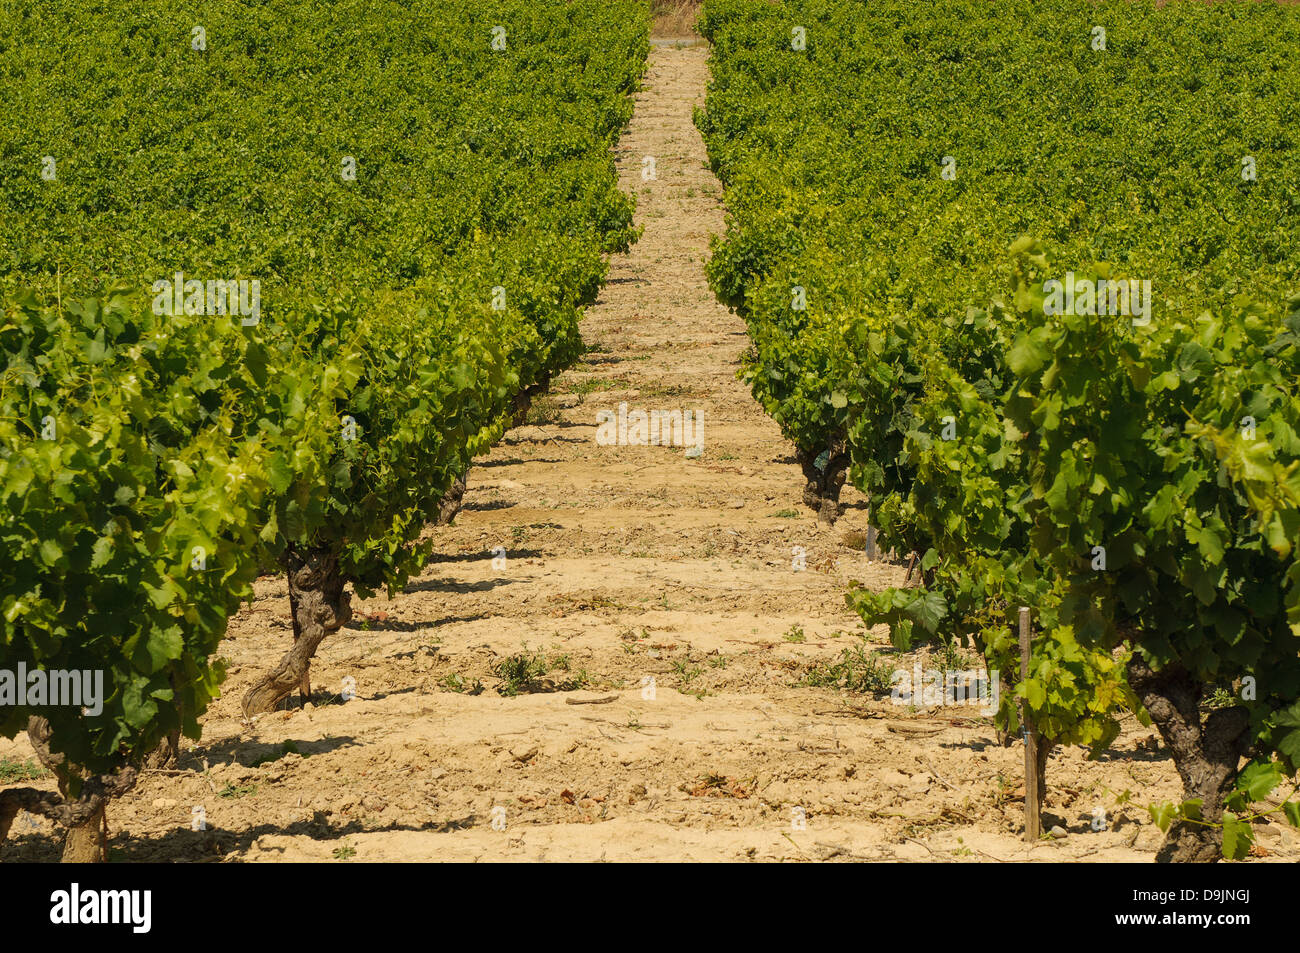 Vineyards in Langeuedoc, France Stock Photo